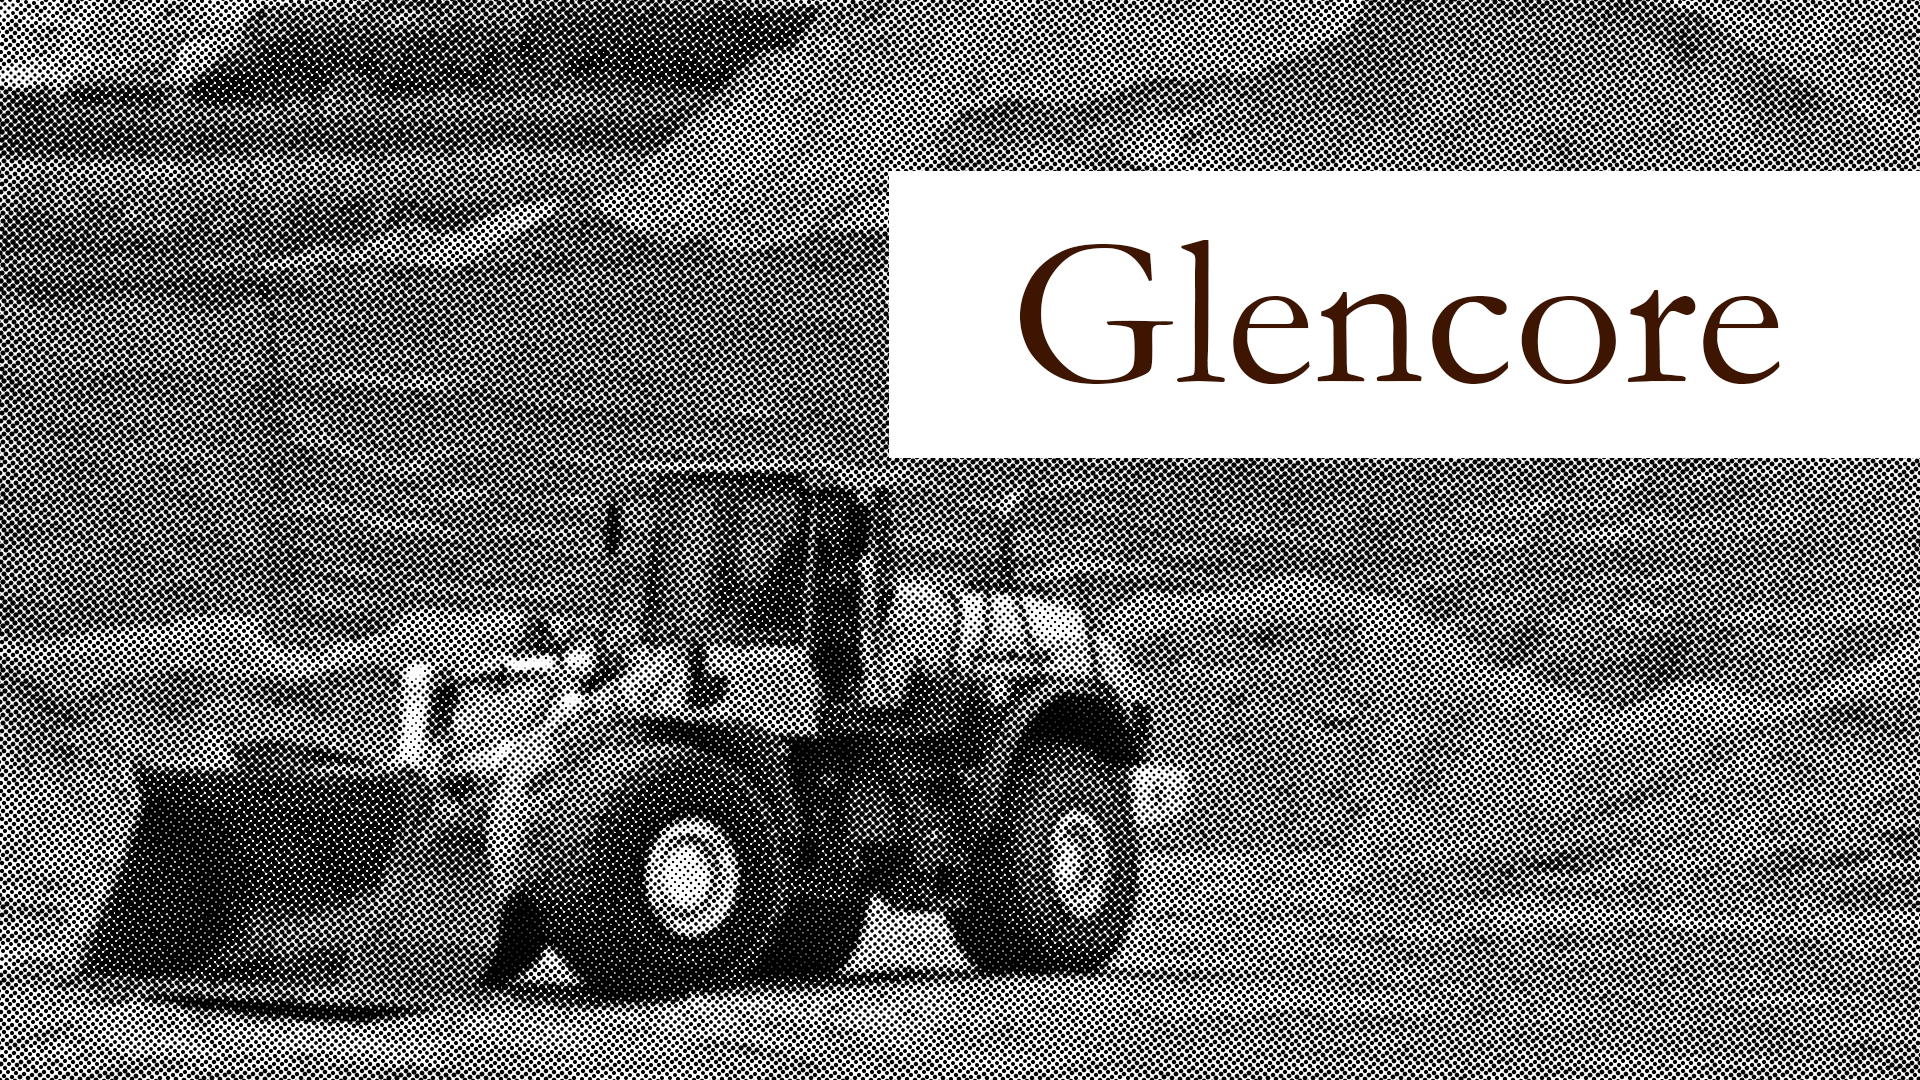 Glencore: mining business with high dividend